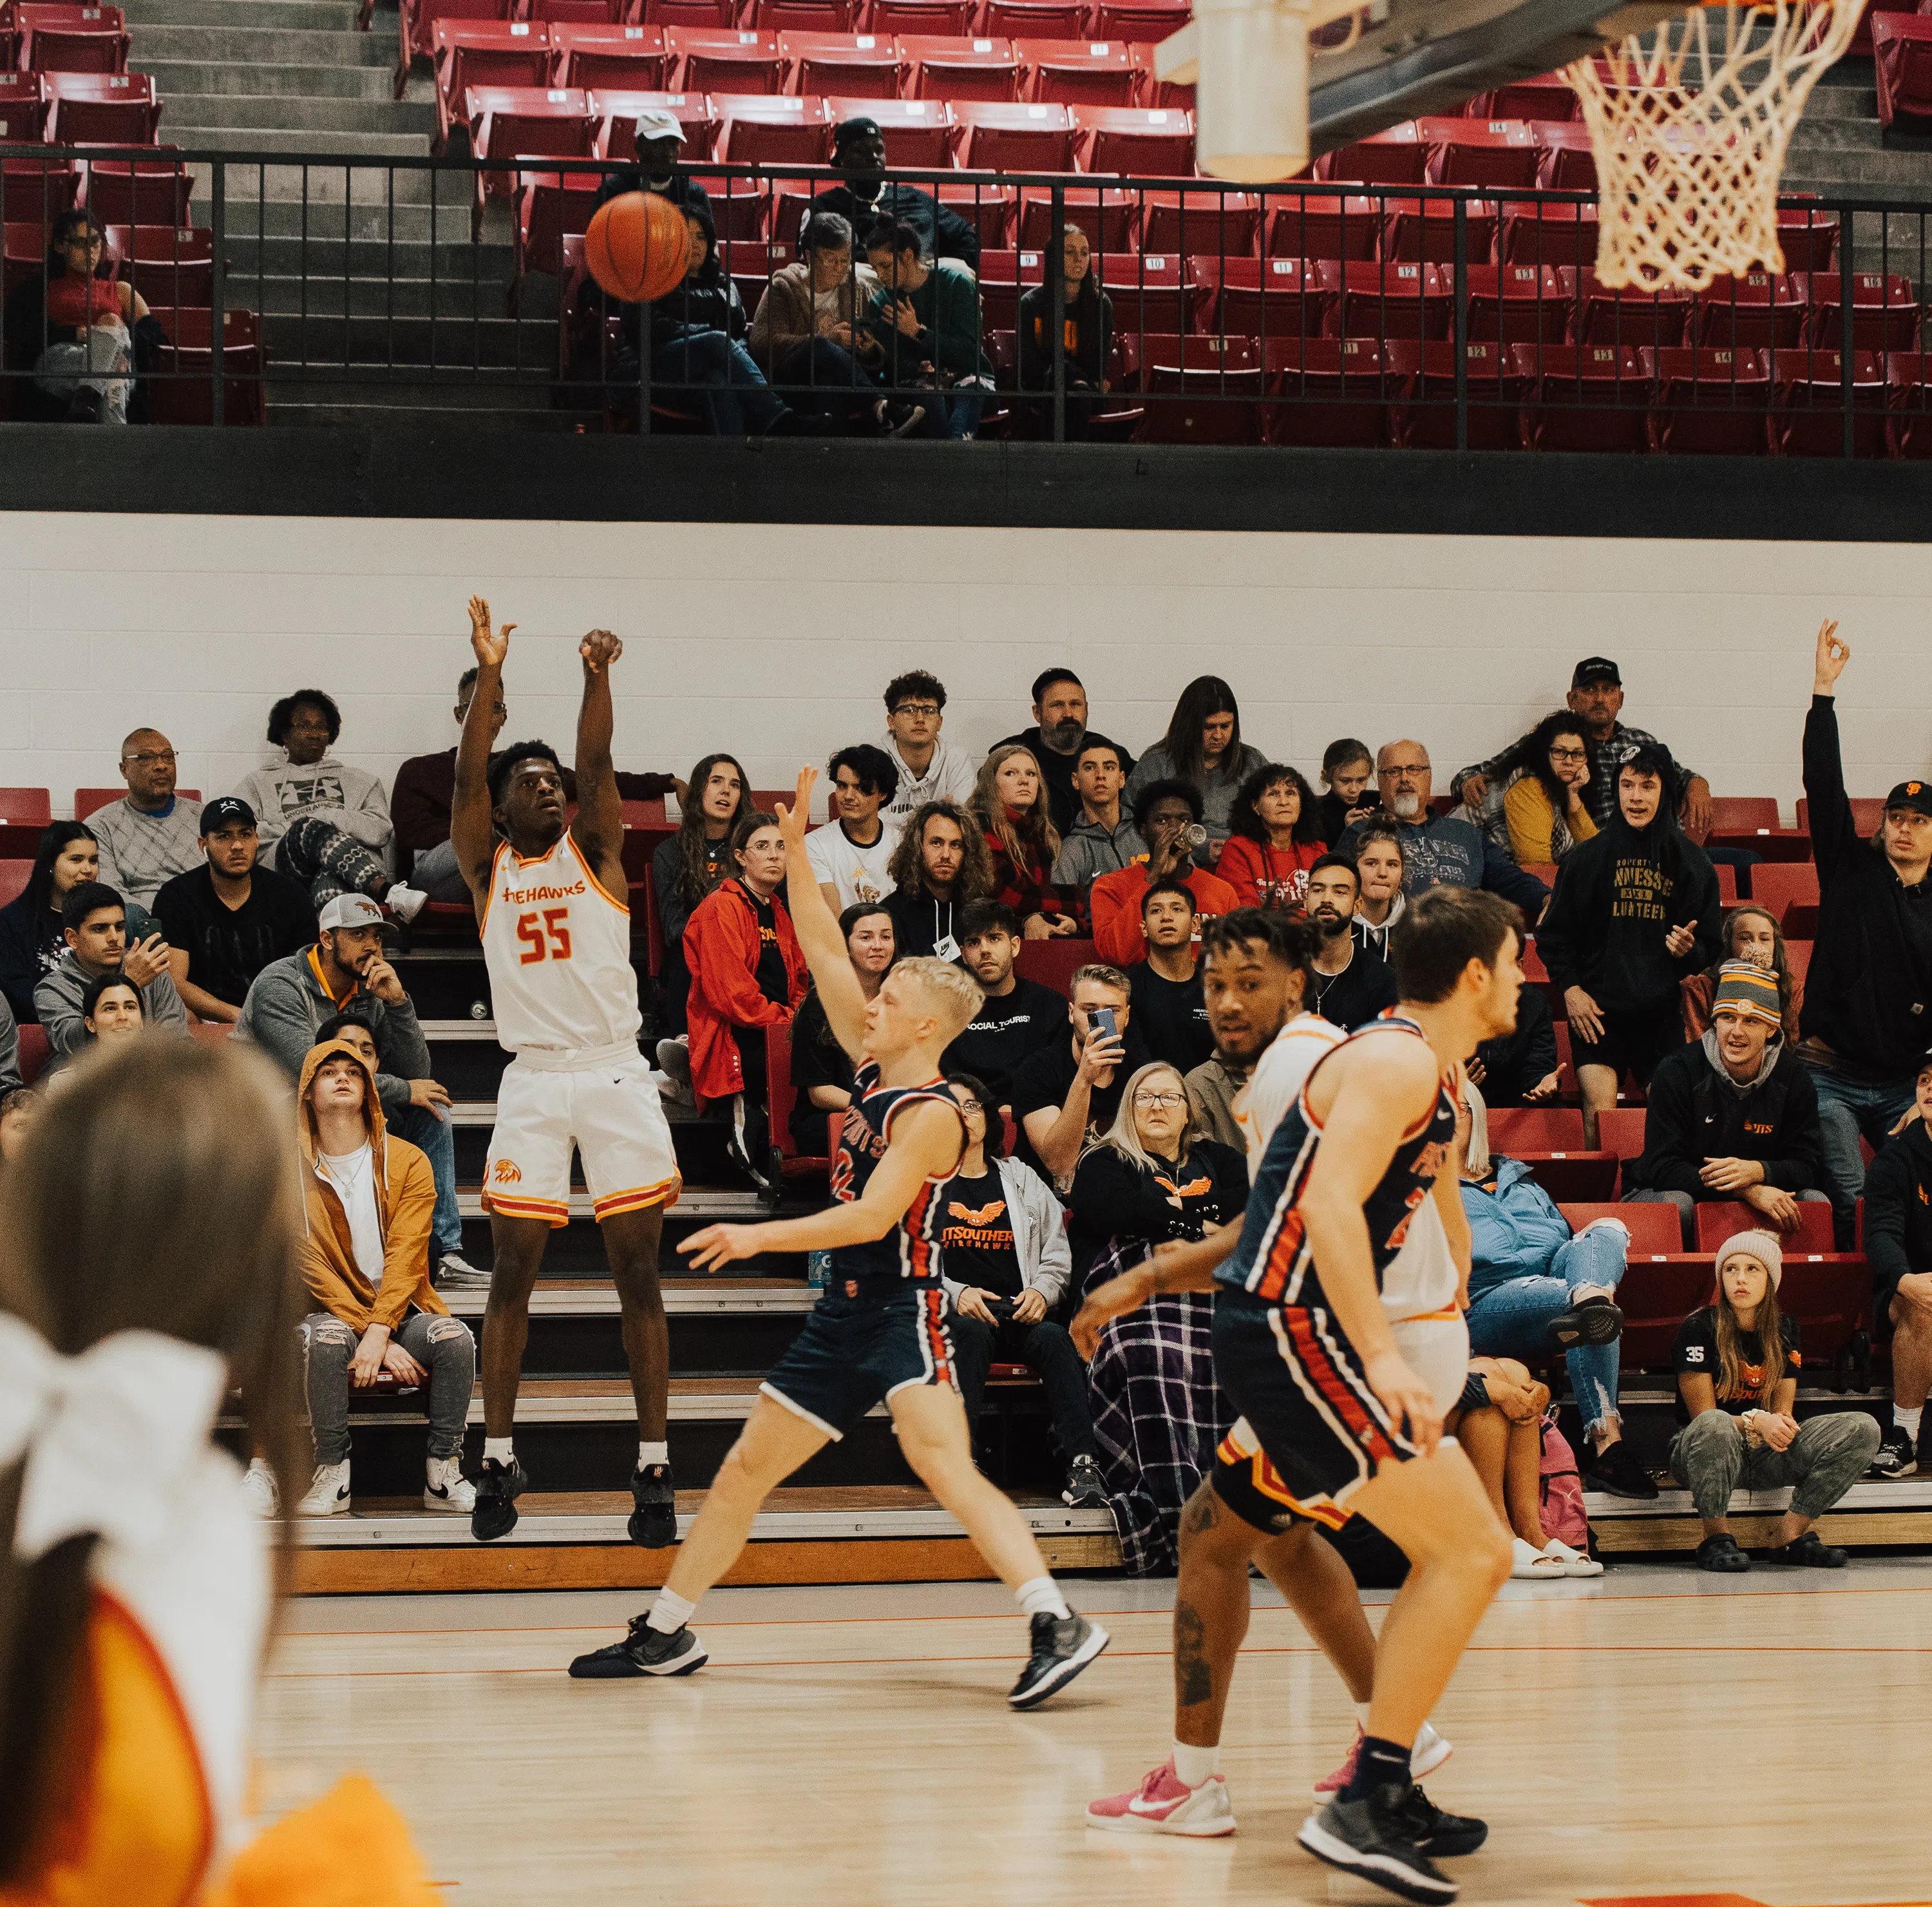 UT Southern Men's basketball team play a game in the gym with spectators in the stands. 